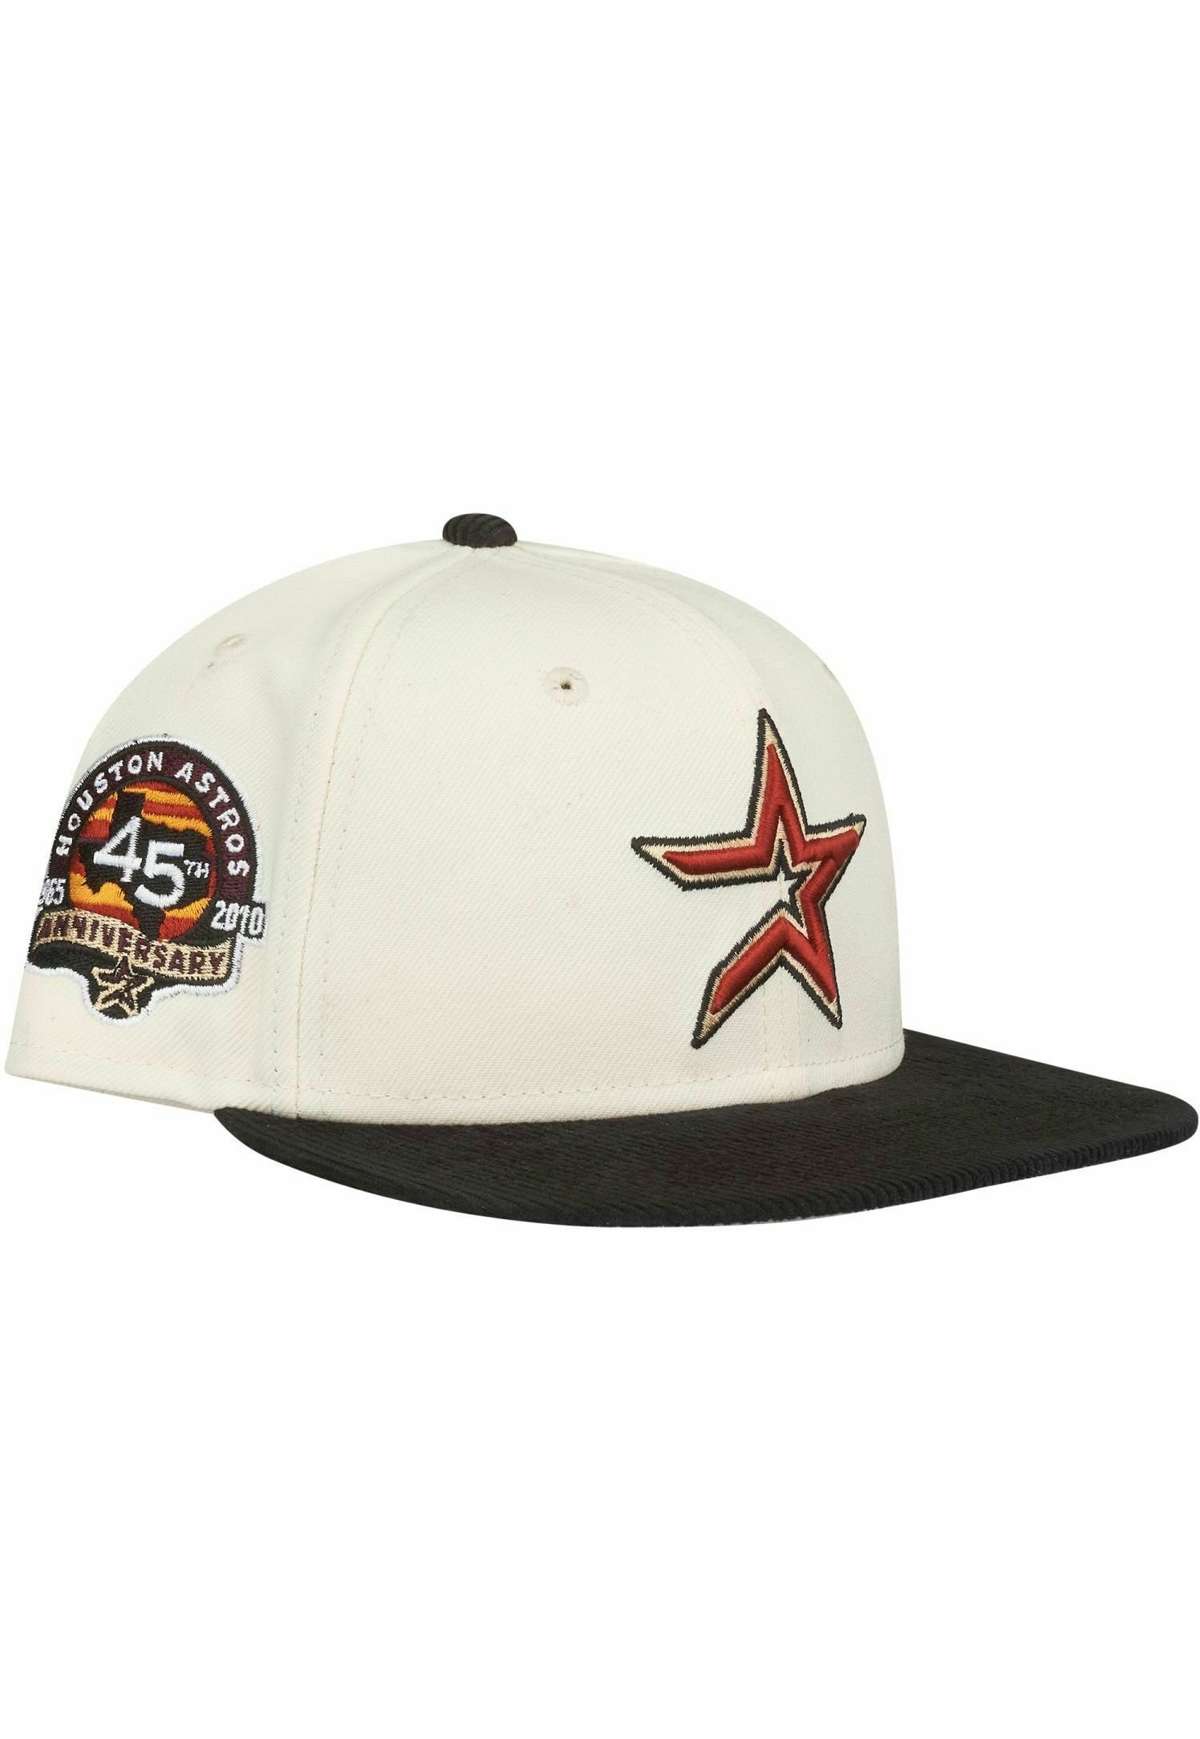 Кепка 59FIFTY COOPERSTOWN HOUSTON ASTROS CHROME